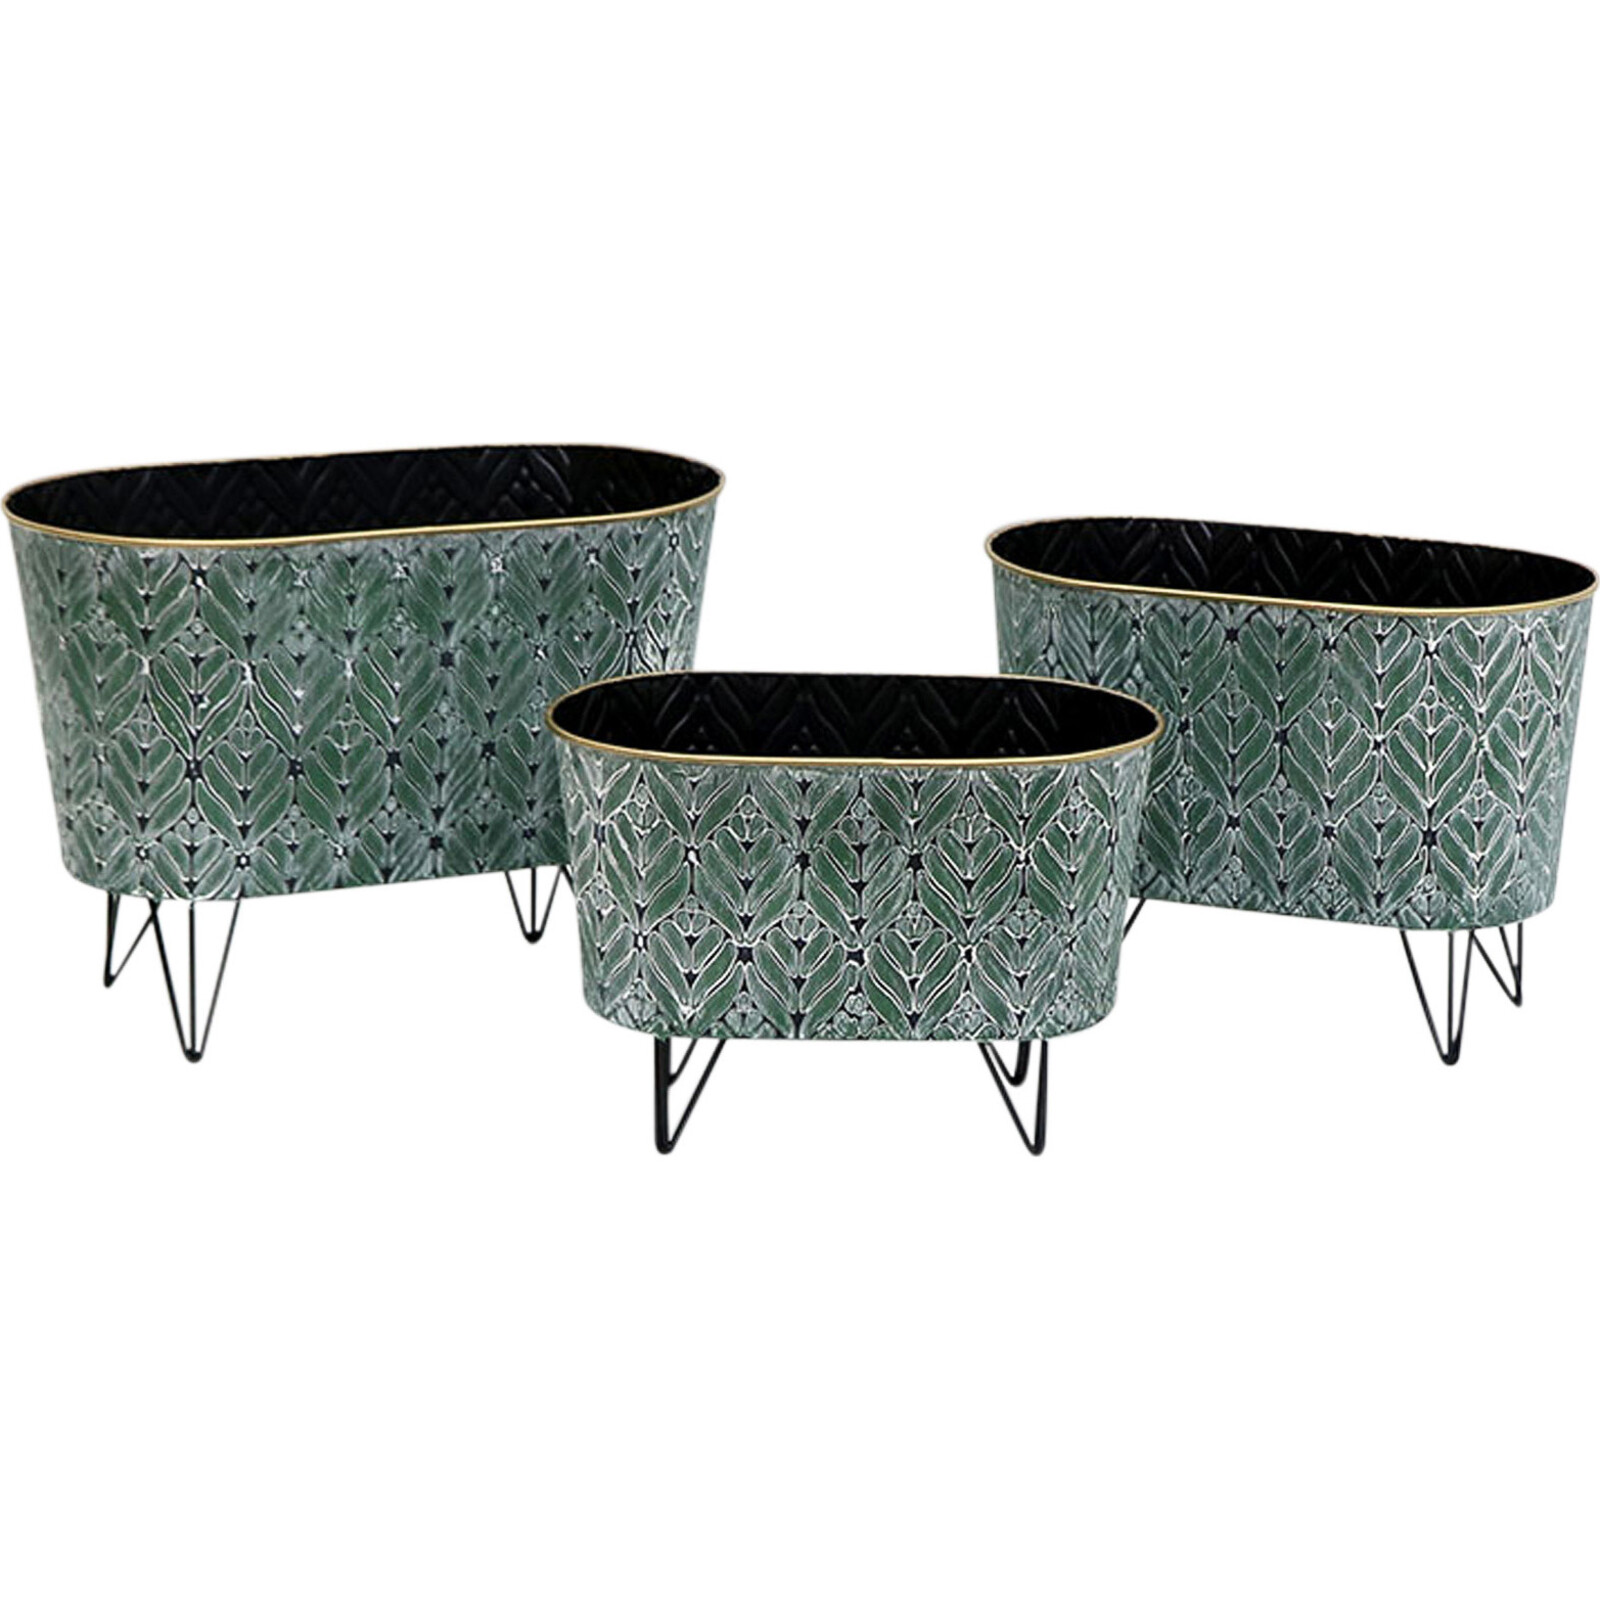 Planters Green Wash S/3 